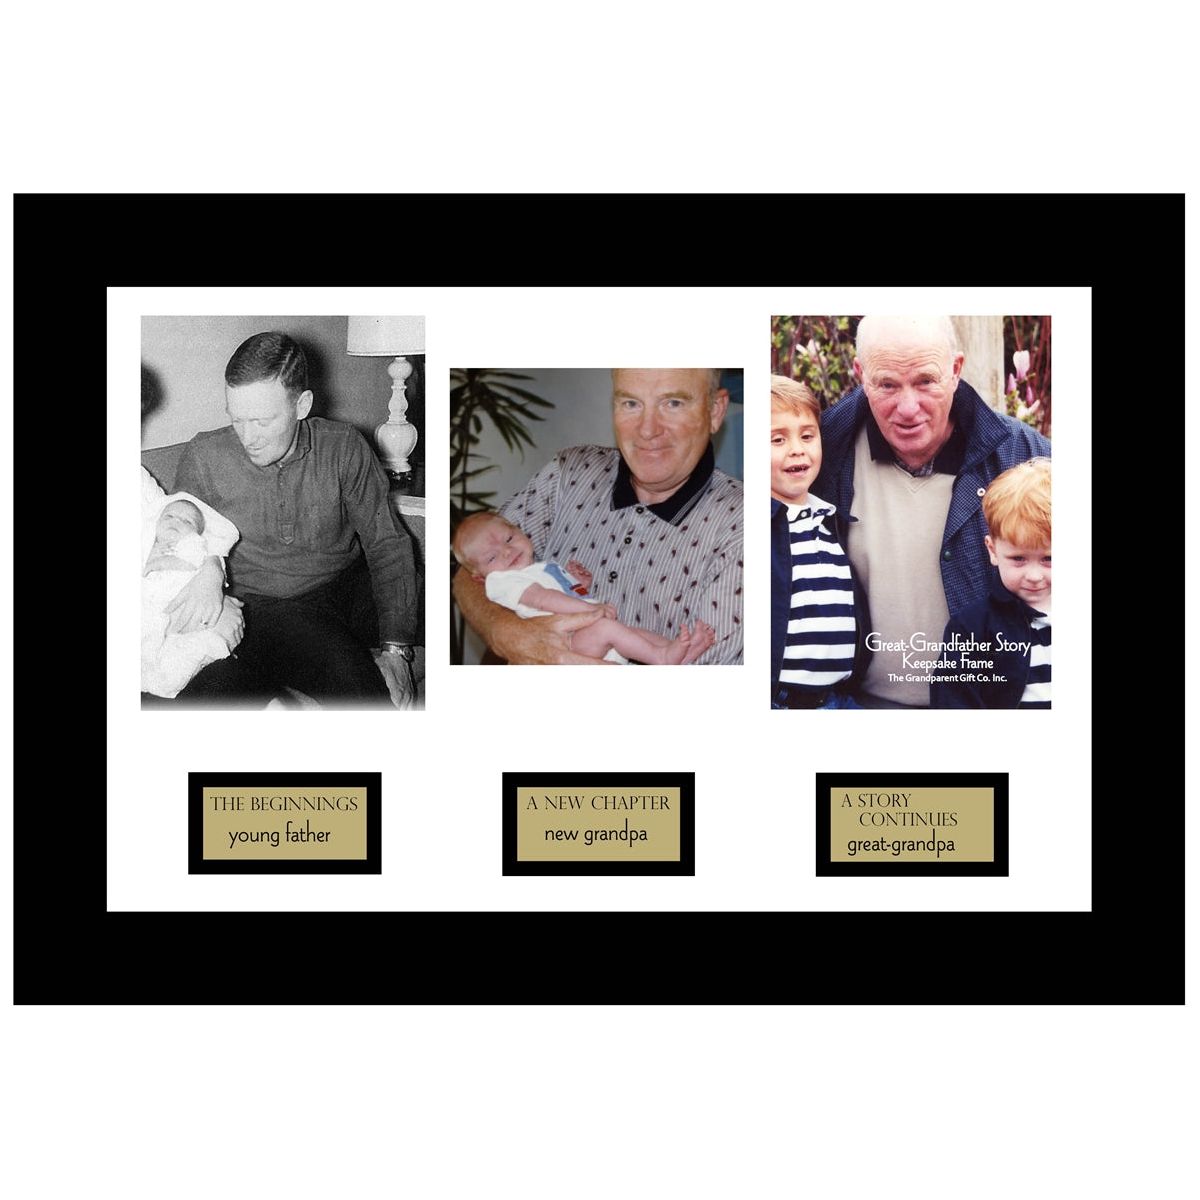 8x12 black frame for wall or table display with 3 spaces and captions for photos for a Great-Grandpa&#39;s life story.